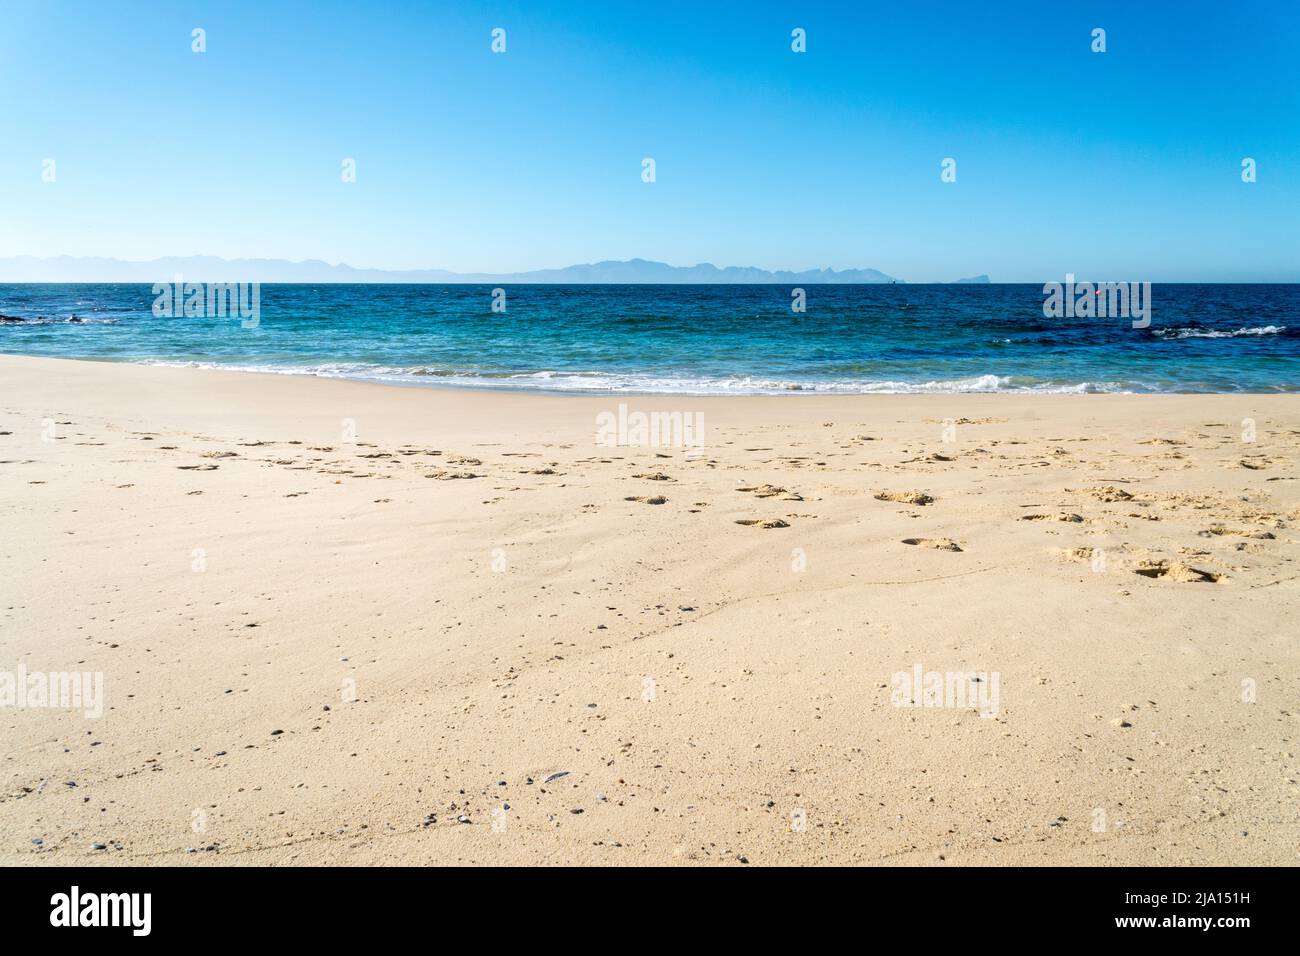 empty white sand beach with no people and calm sea with cloudless blue sky and mountains in the background concept weather and climate Stock Photo